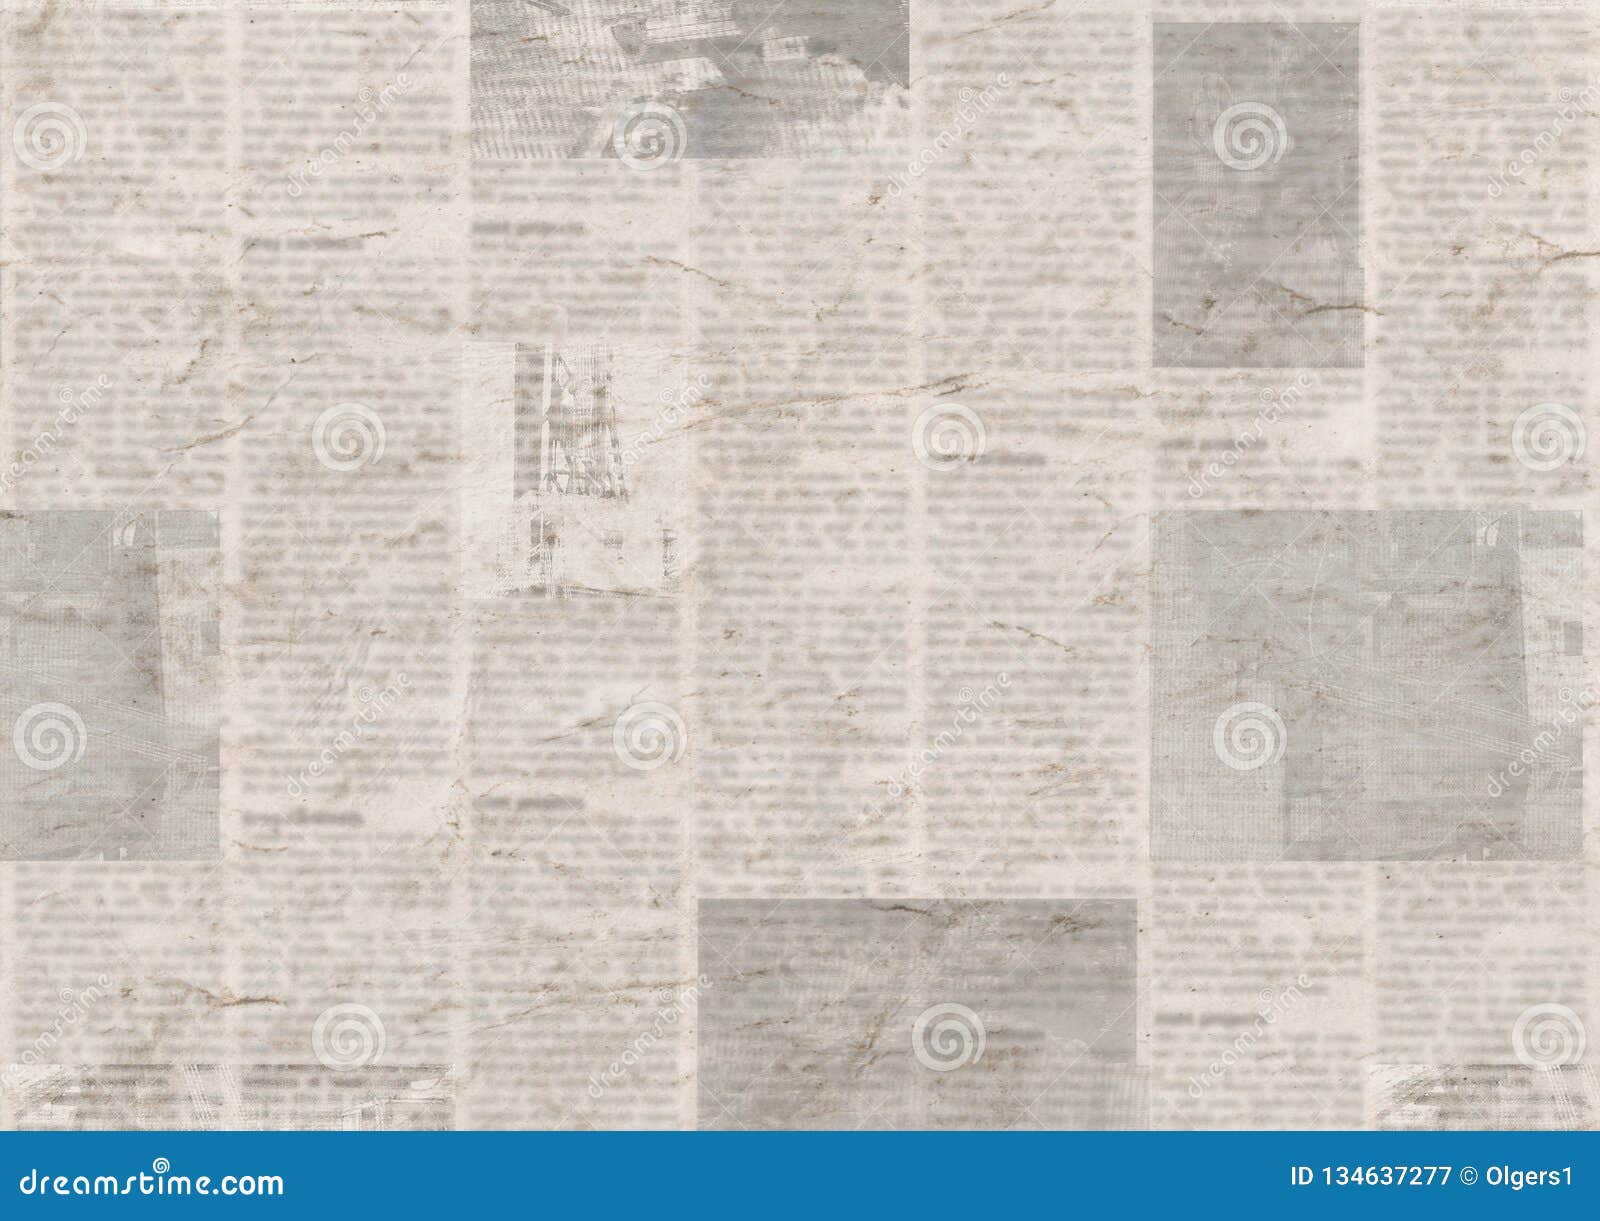 Newspaper With Old Grunge Vintage Unreadable Paper Texture Background Stock Image Image Of Page Message